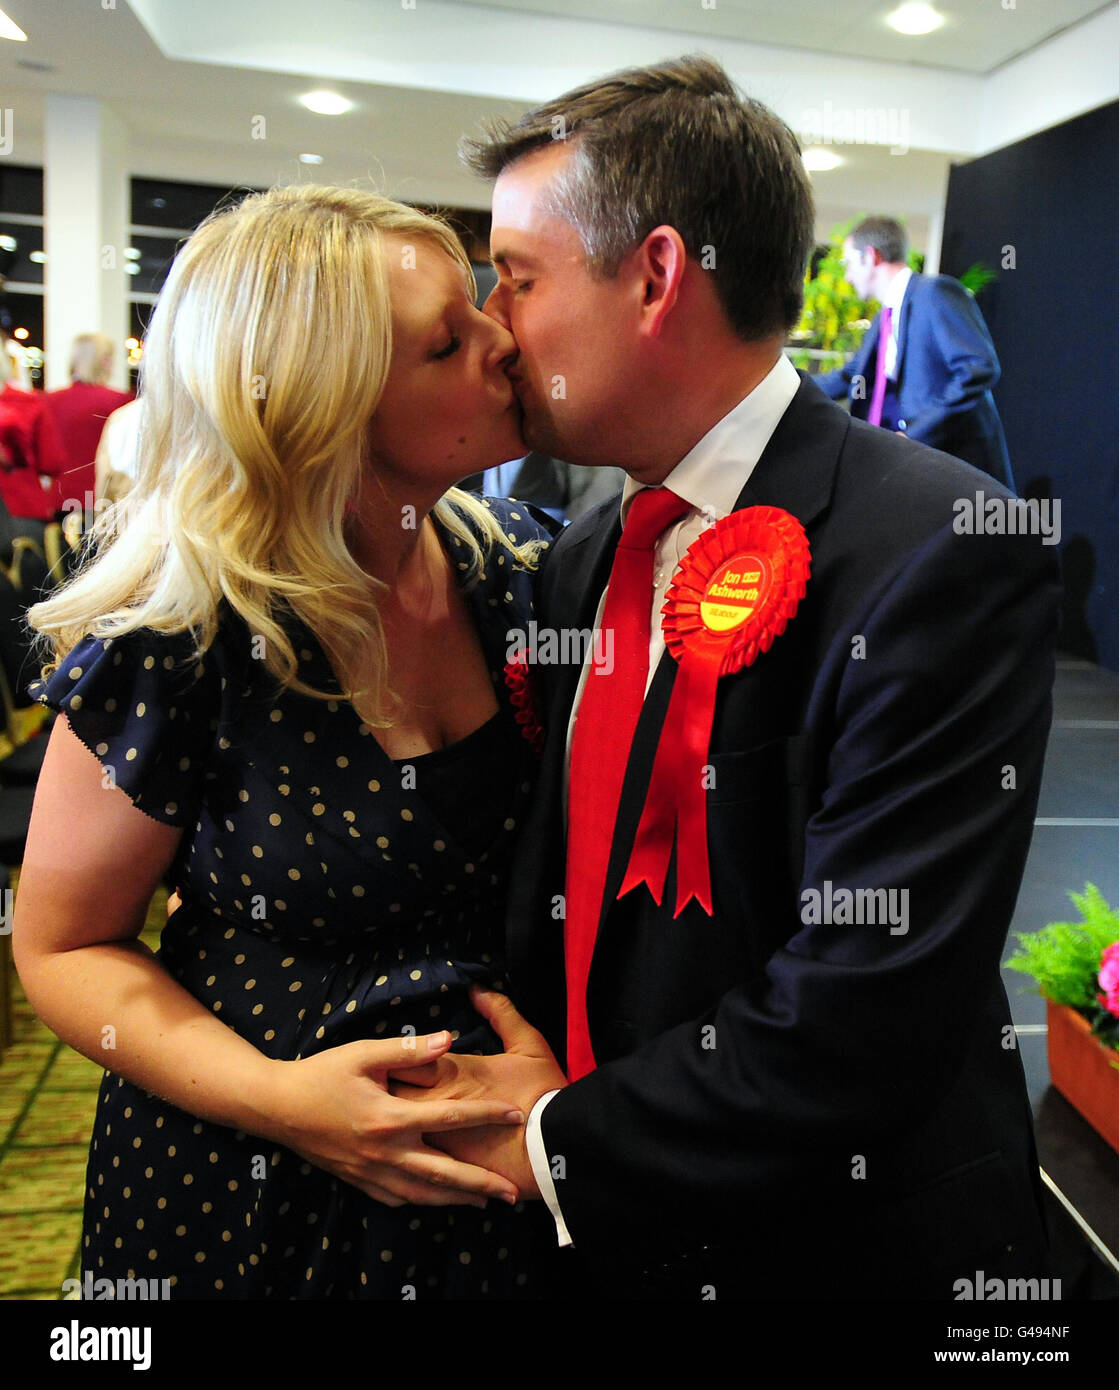 Labour candidate Jon Ashworth is congratulated by his pregnant wife Emilie after he was declared the winner for the parliamentary by-election for Leicester South at Leicester Tigers Rugby Ground, Leicester. Stock Photo